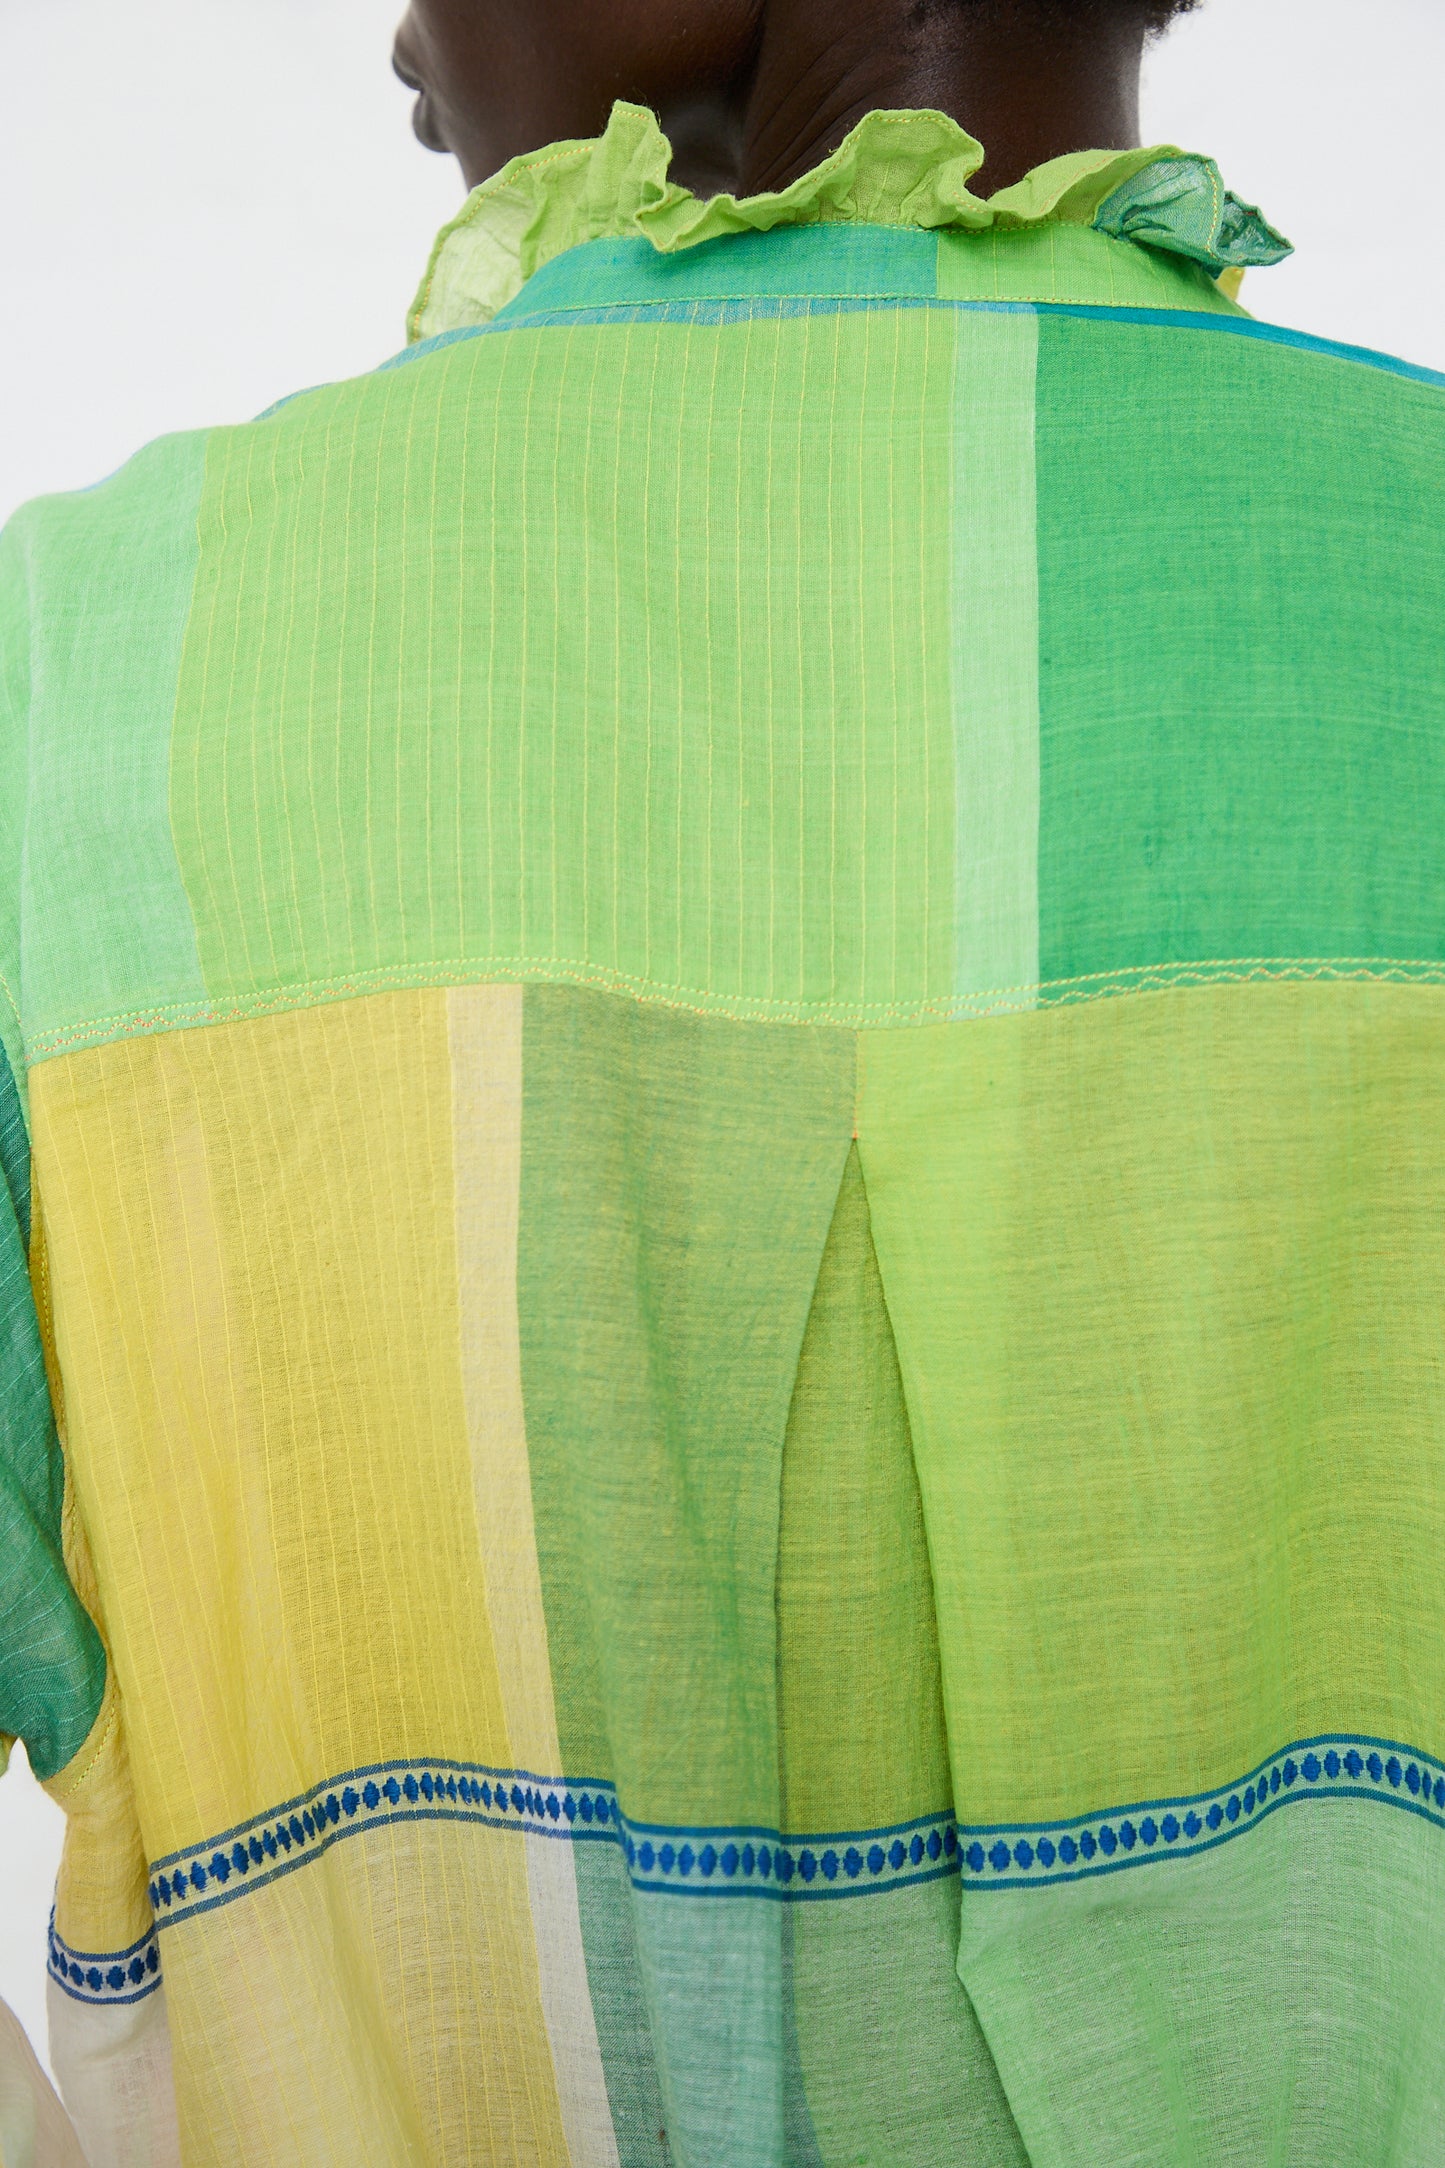 Rear view of a person wearing an Injiri relaxed fit, sheer green and yellow striped long sleeve shirt with a blue trim, focusing on the texture and colors of the fabric.